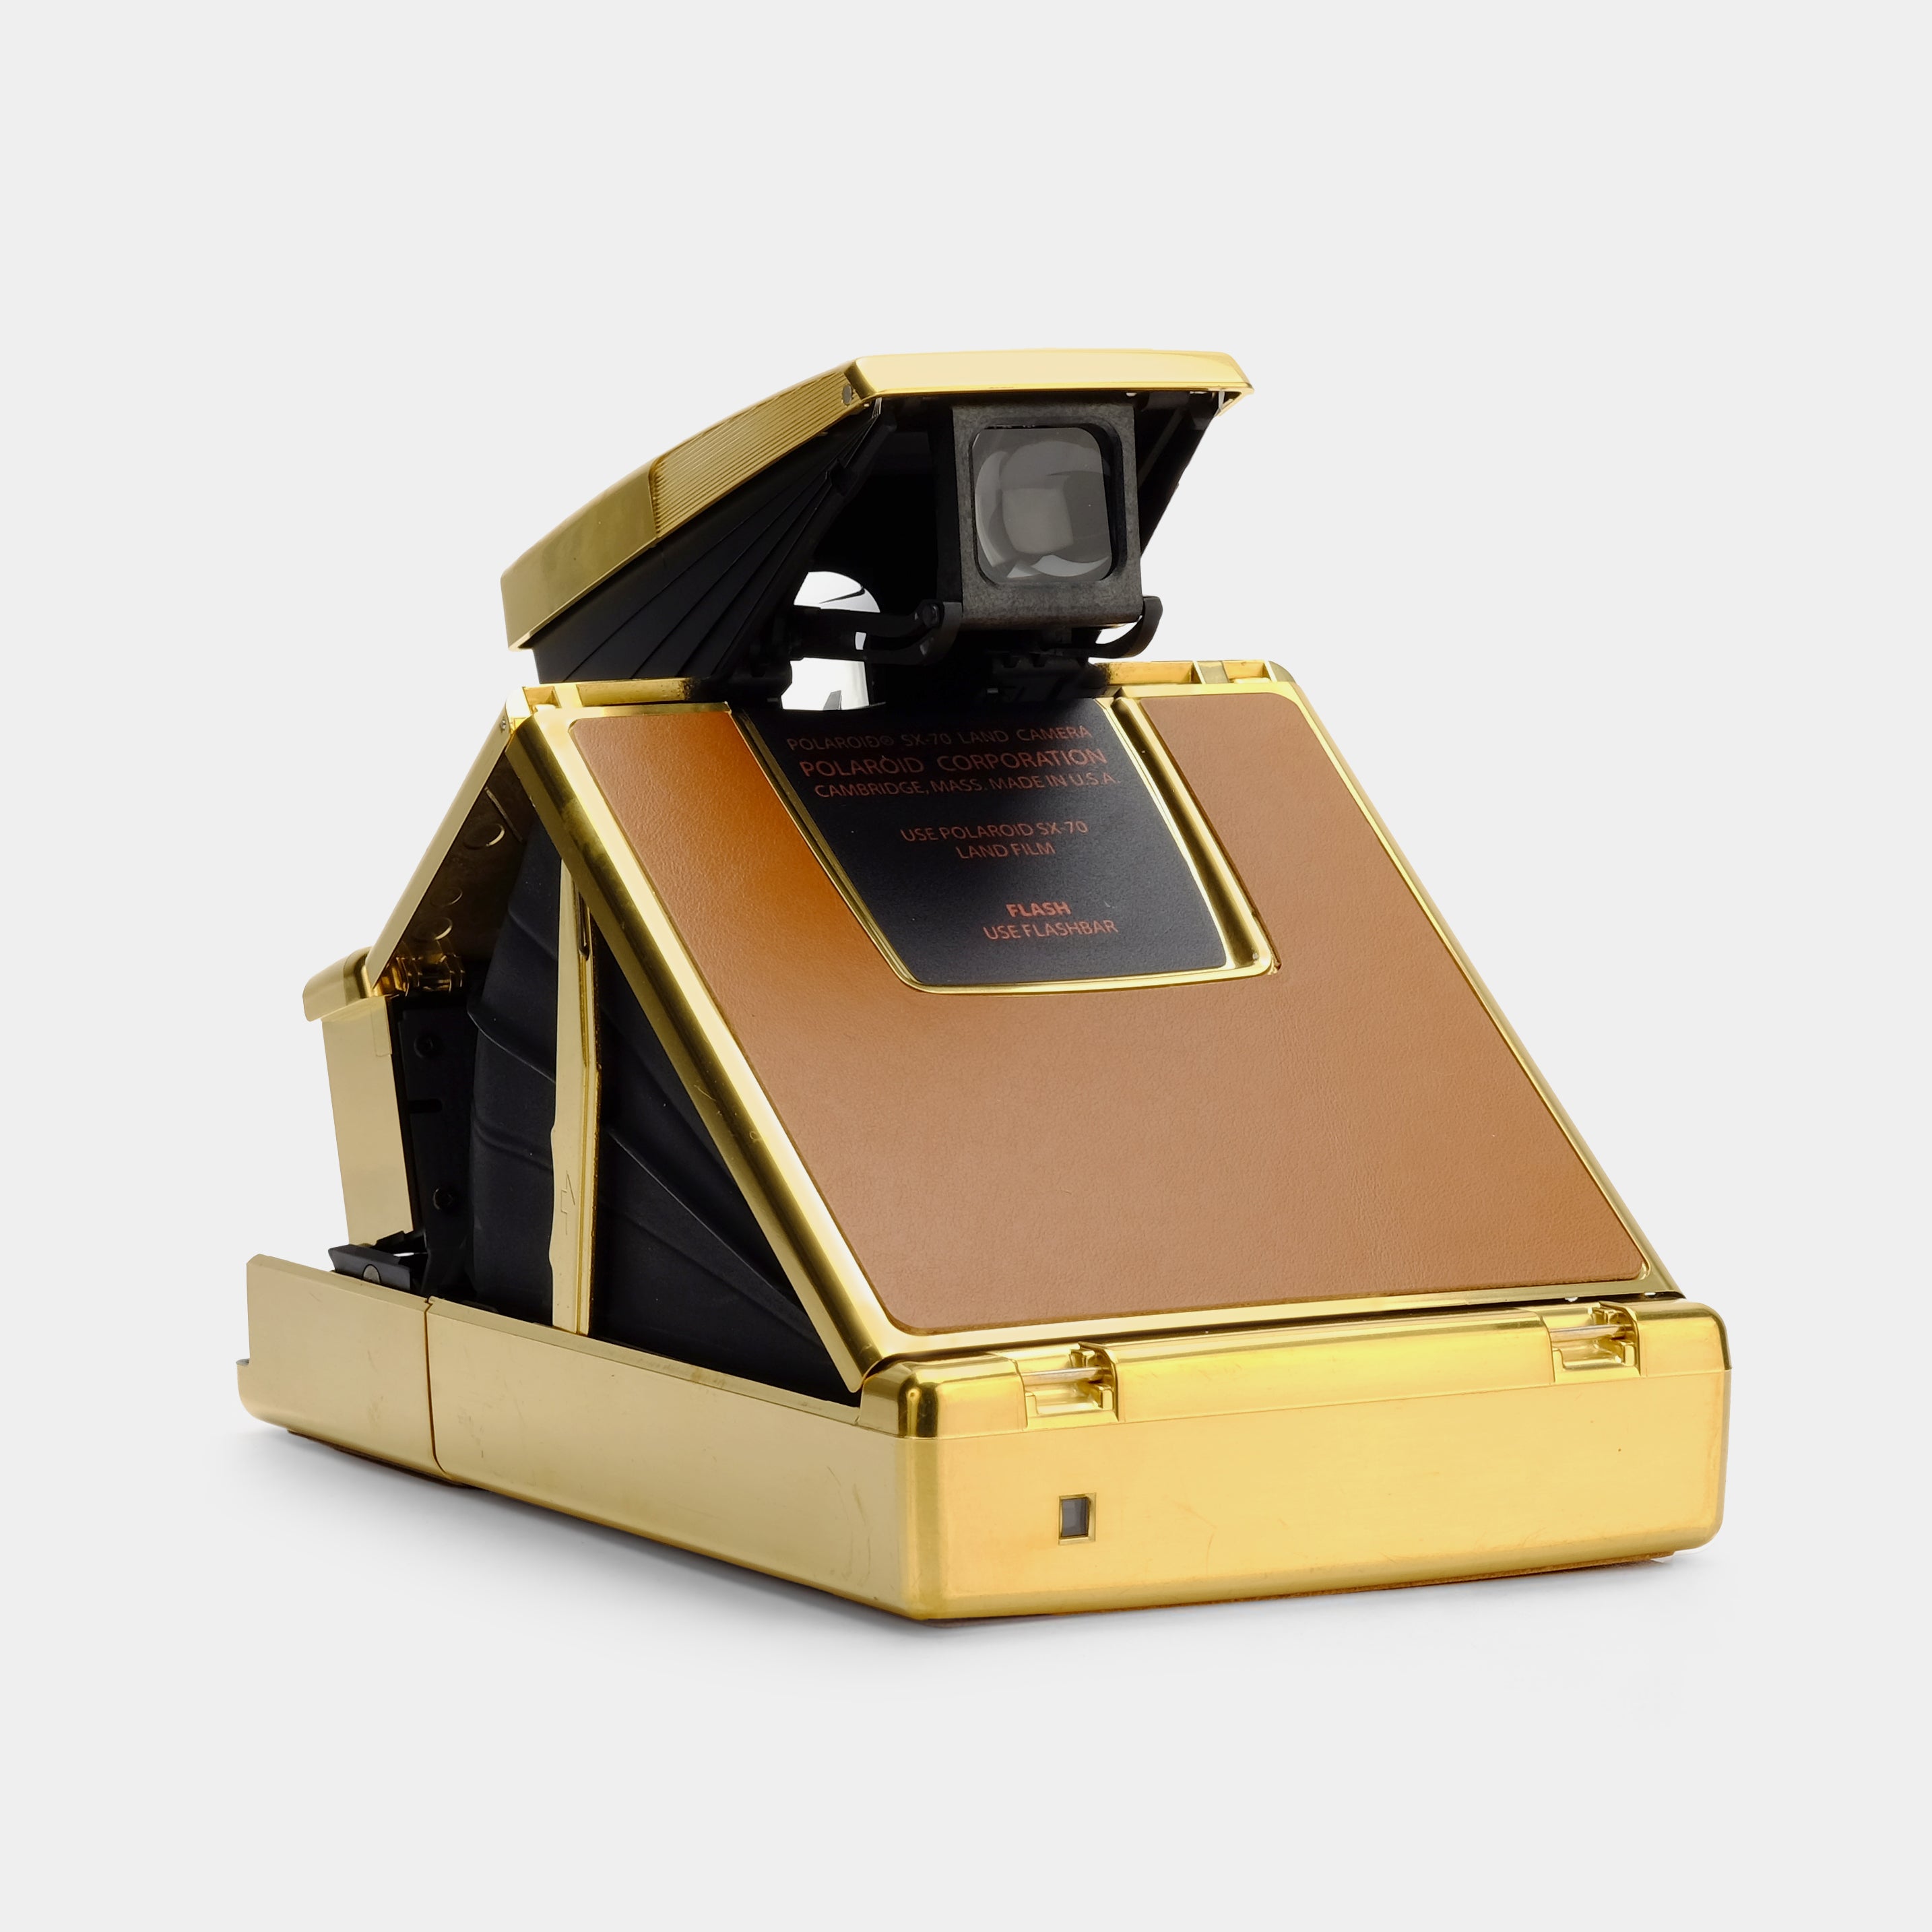 Polaroid SX-70 Alpha Gold Plated Tan Leather Limited Edition Folding Instant Film Camera